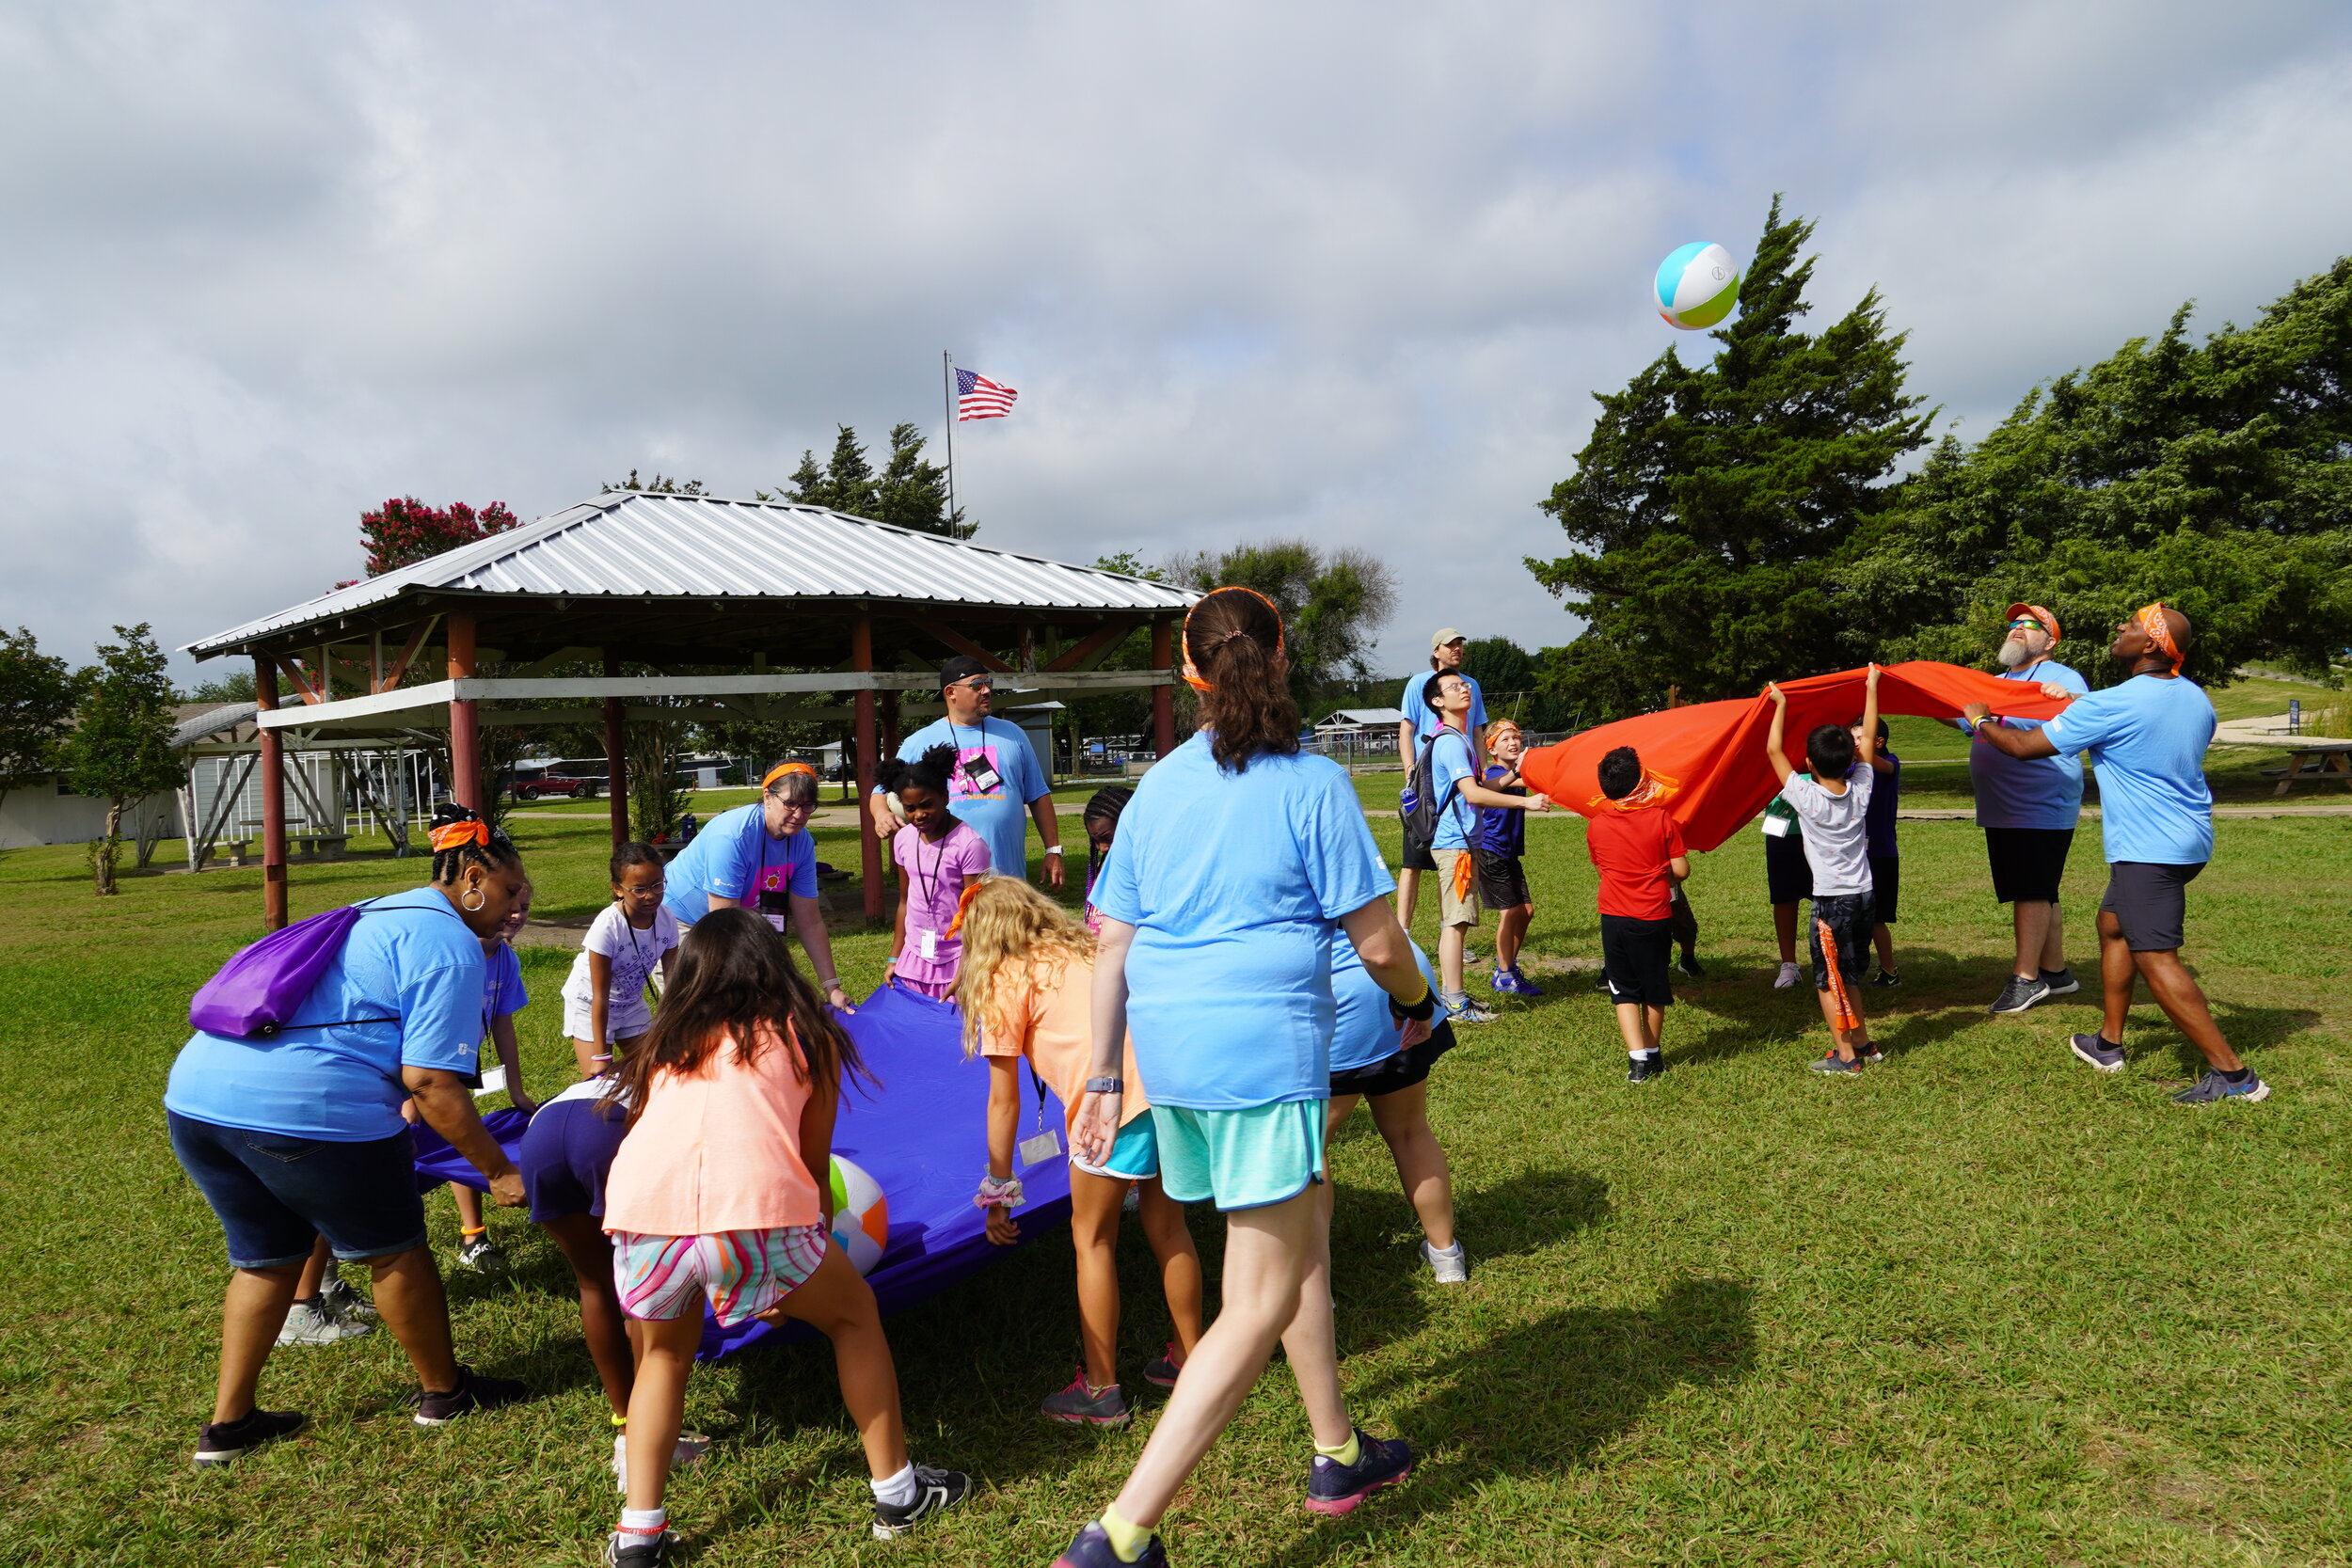  Volunteers play games with the children that help them in processing their loss. A beachball with different words such as sad, angry, and hopeful is tossed in the air. Whatever word it lands on, the campers tell what the word means to them. It opens